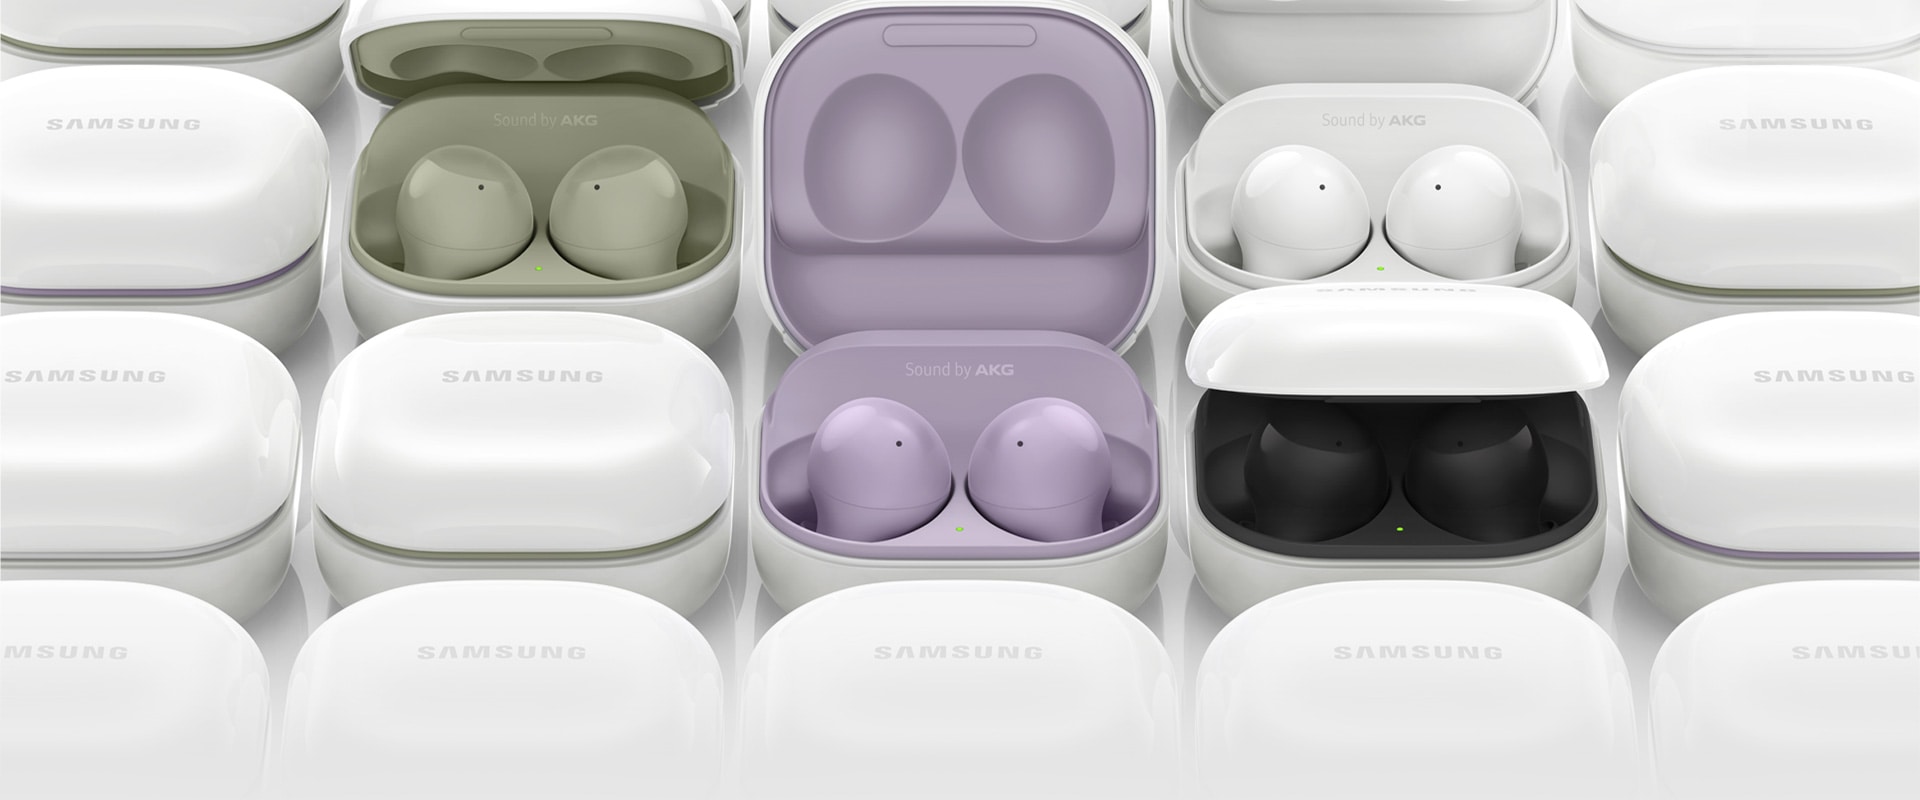 Galaxy Buds2 cases are placed next to each other. Several of the cases are opened, each showing different colours of the inside case, from olive, lavender, white to graphite.